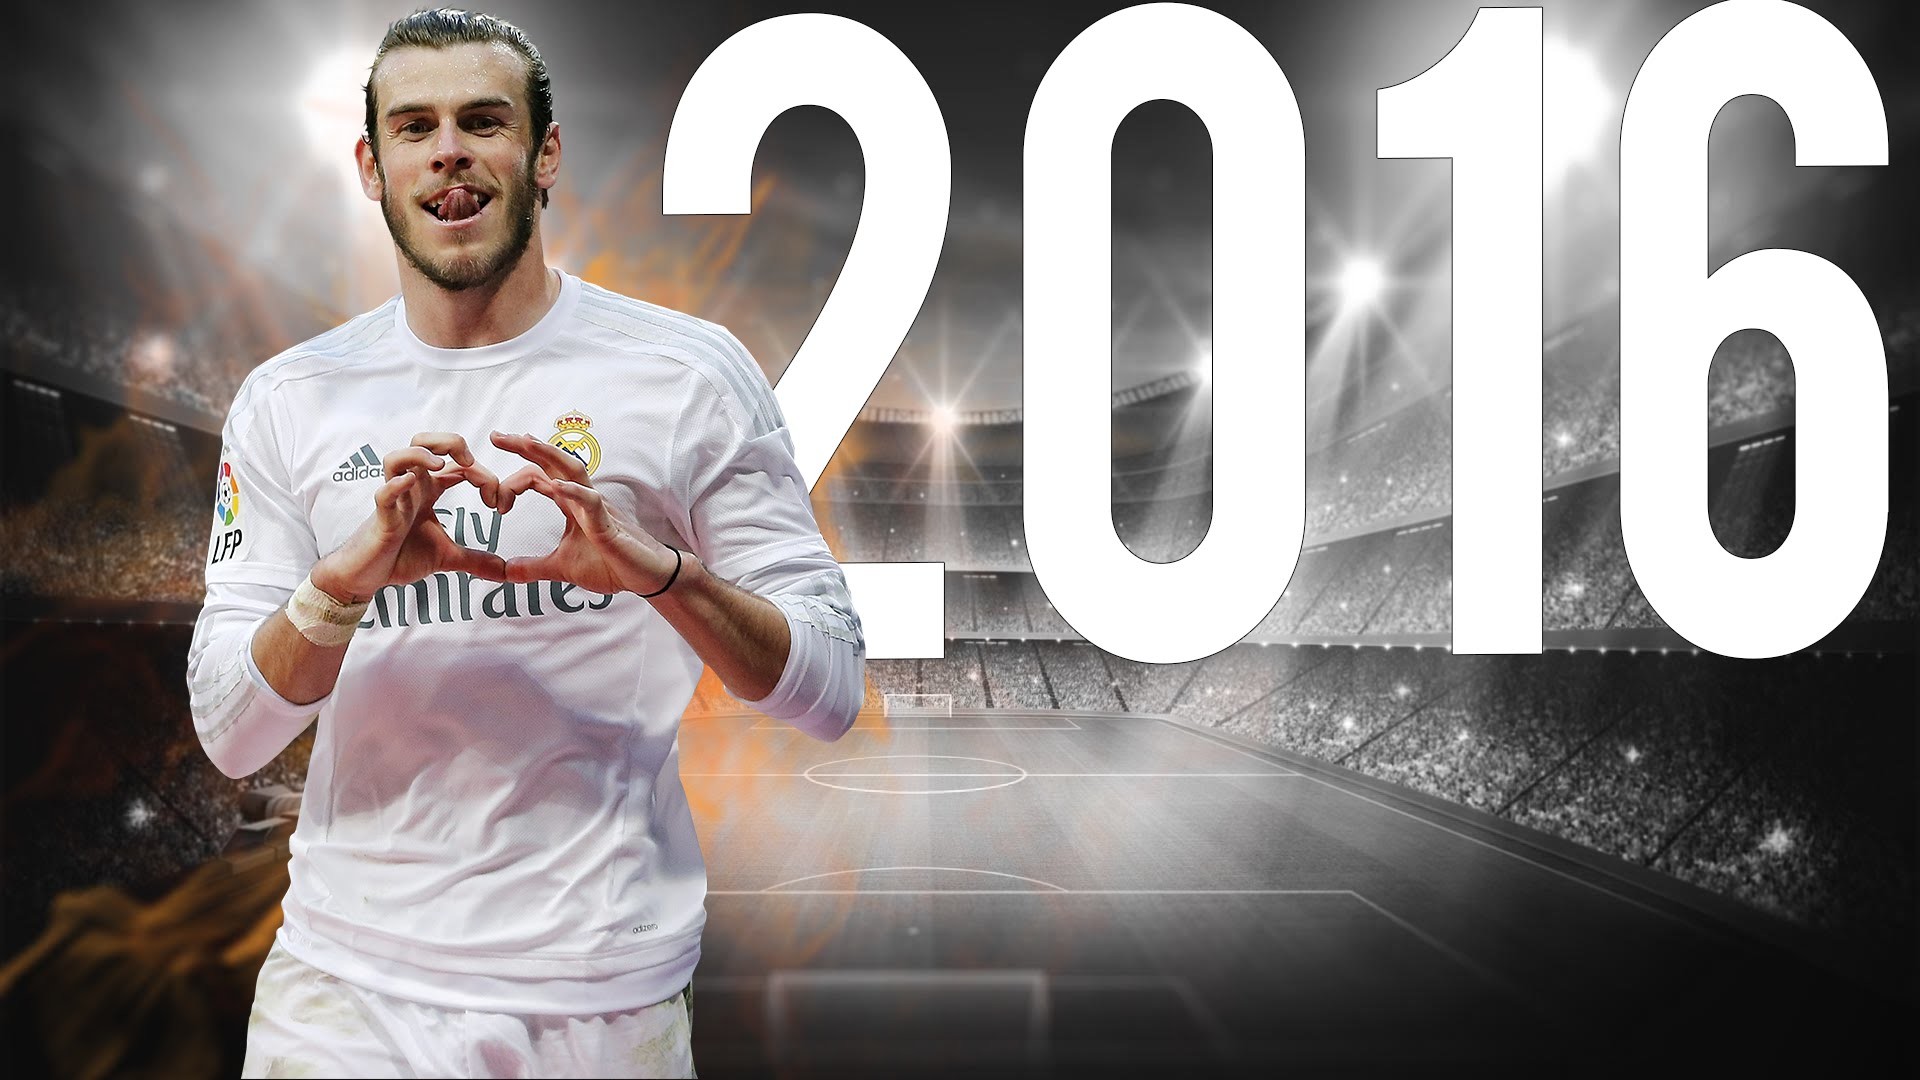 1920x1080 2016 Gareth Bale HD Wallpapers - New HD Images